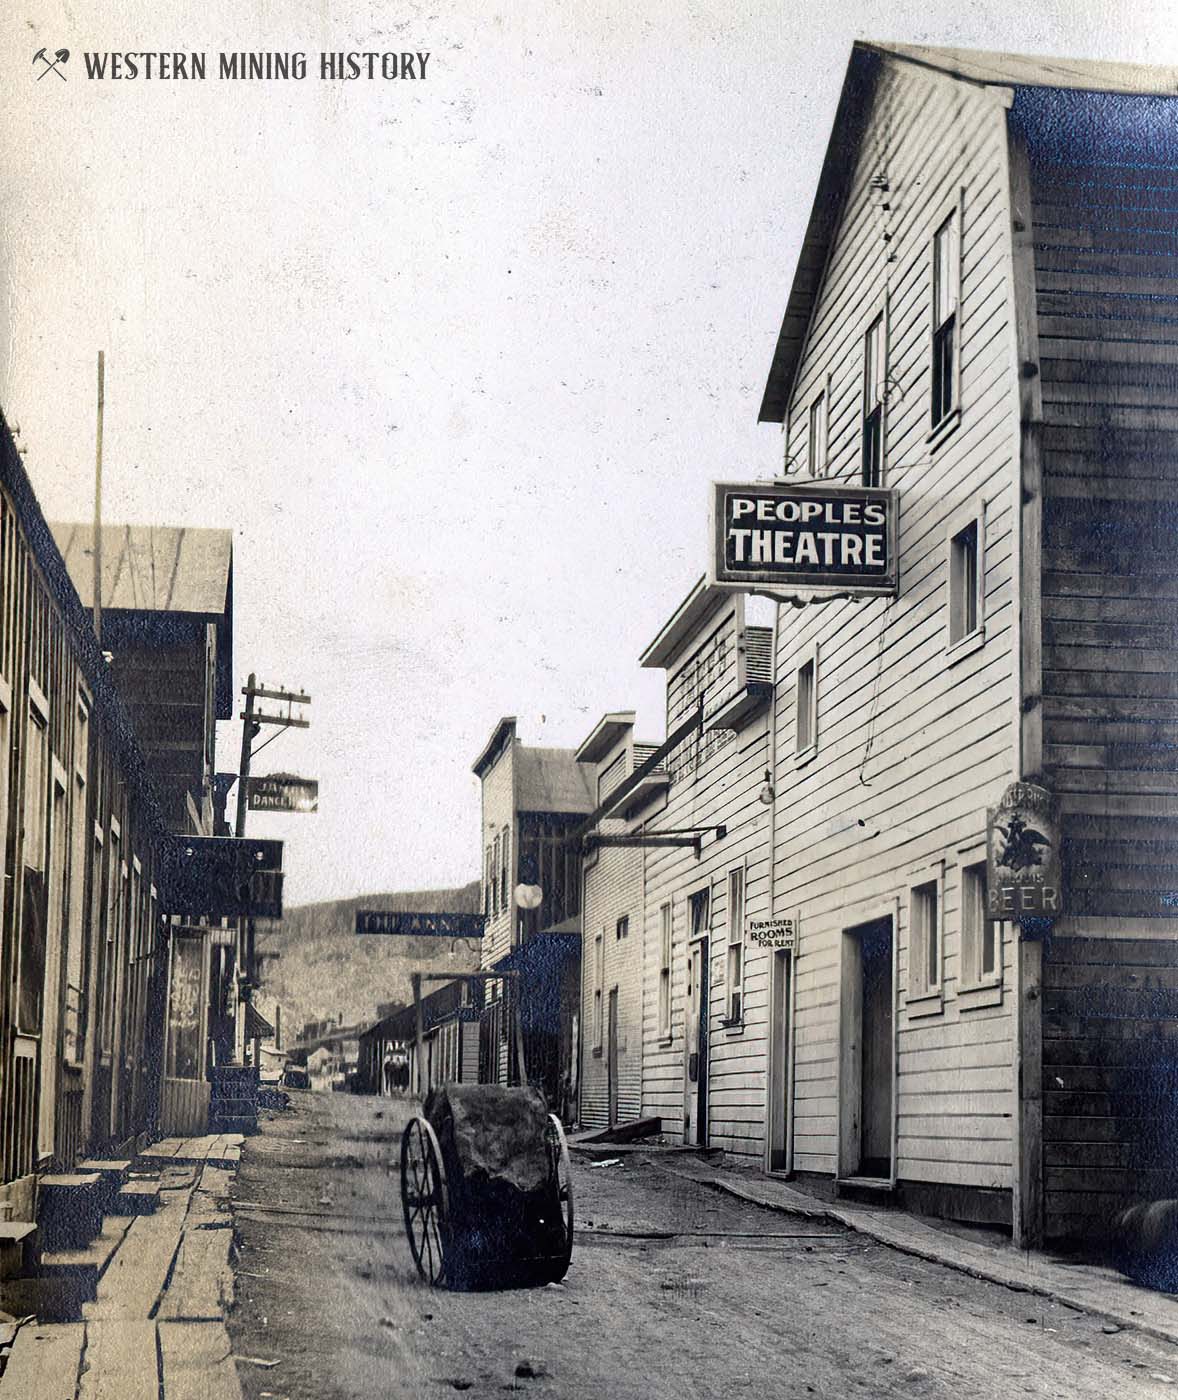 One of Goldfield's many streets ca. 1910